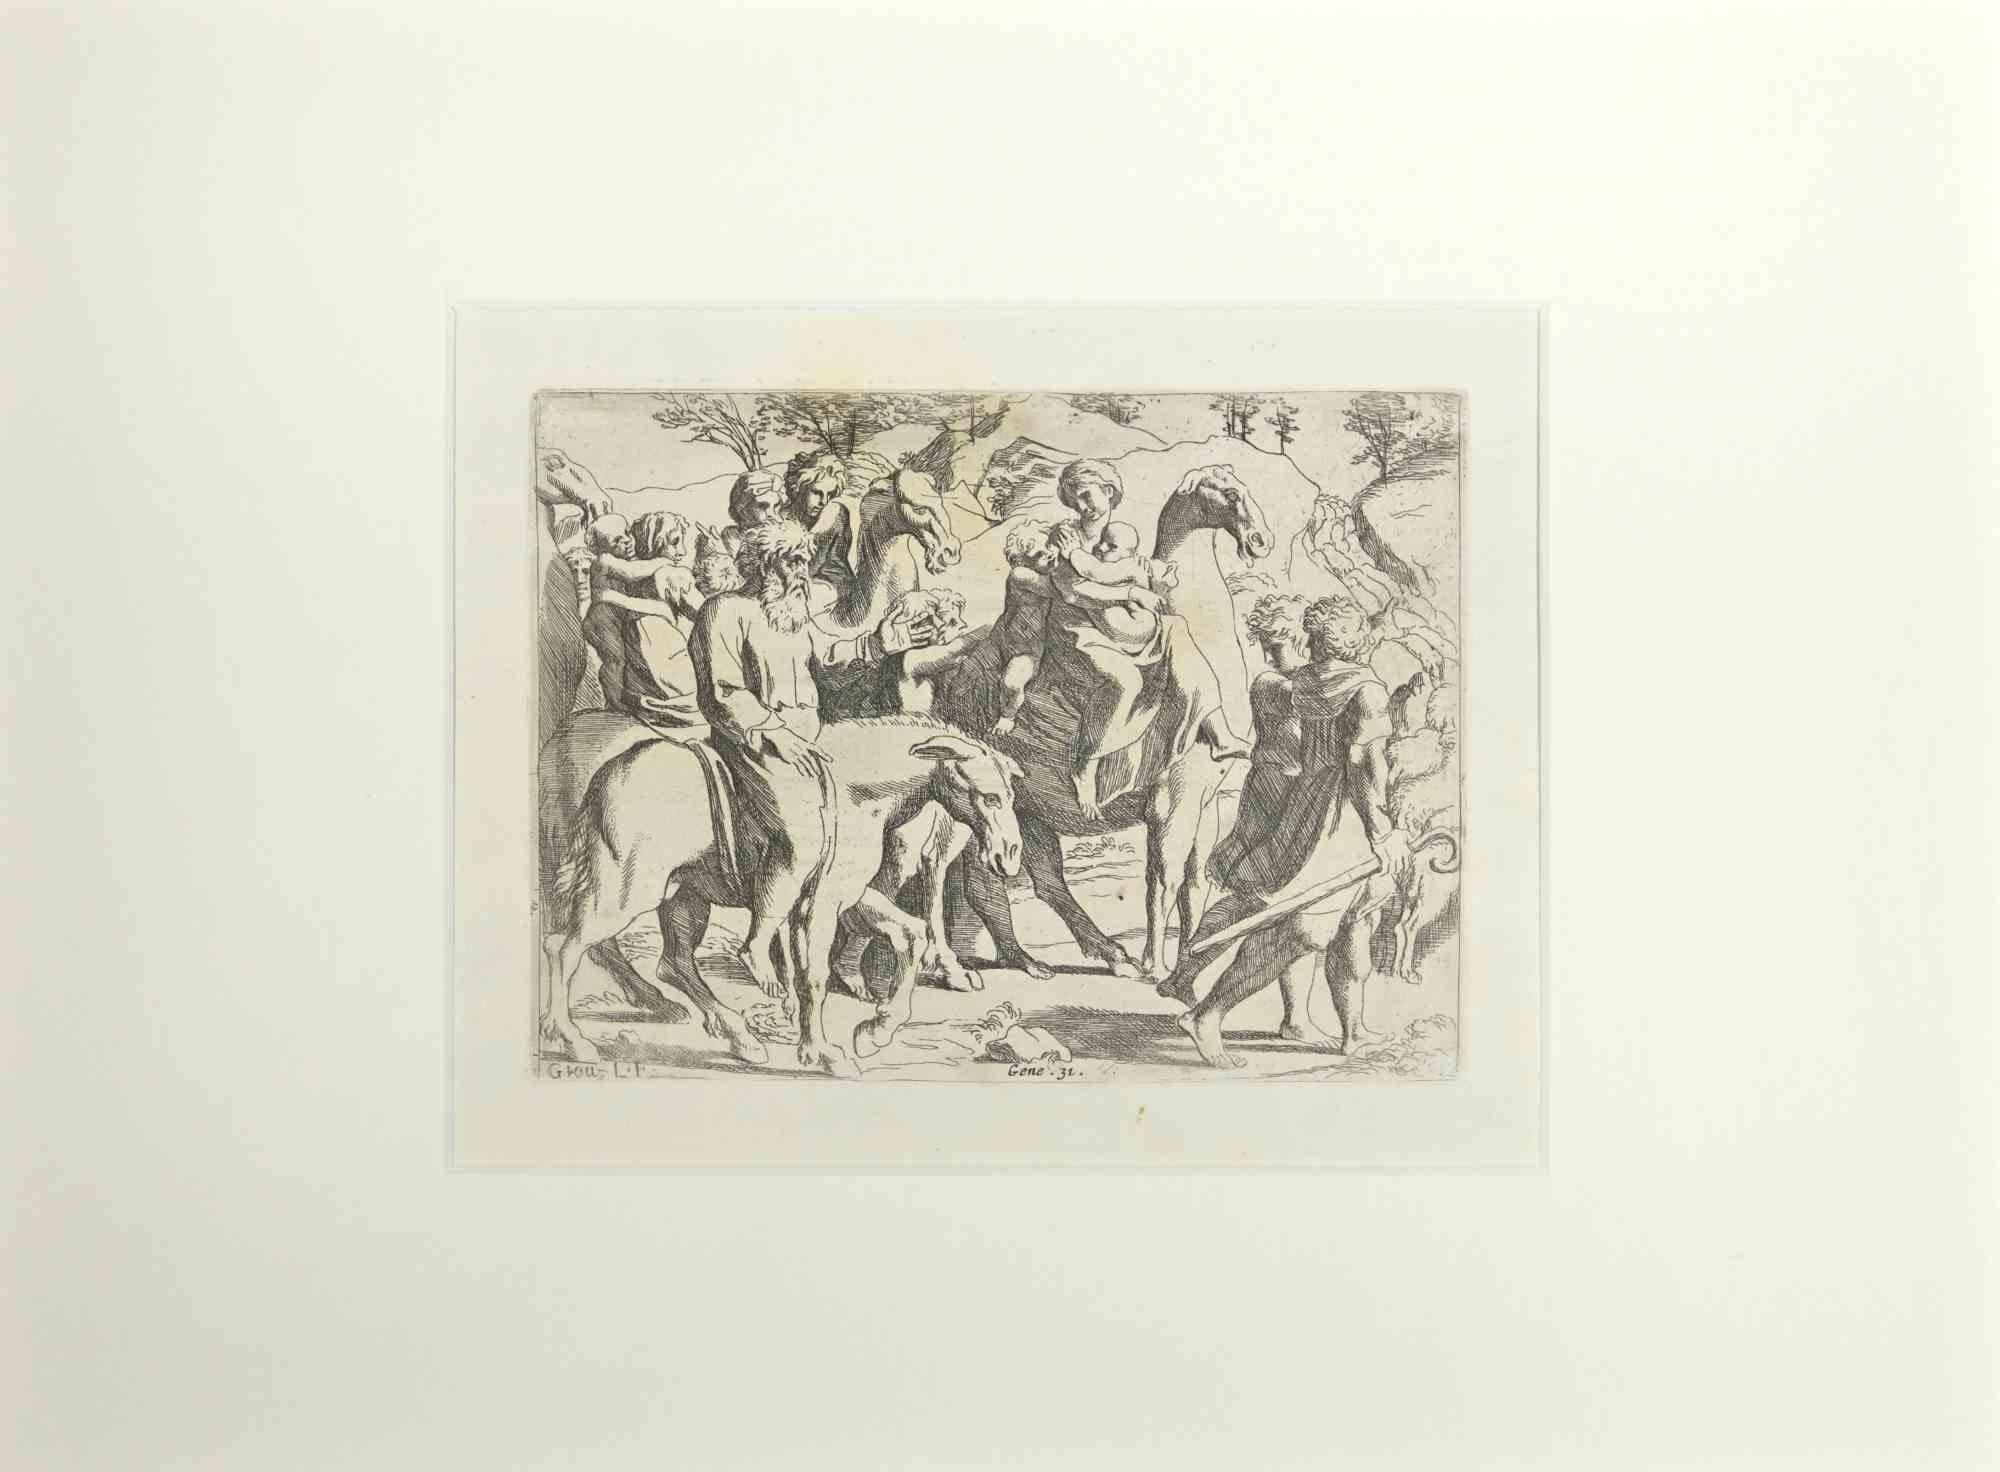 Giovanni Lanfranco (Terenzo, 1582 - Rome, 1647) Figurative Print - Genesis 32 - Old Testament Story - Etching by Giovanni Lanfranco - 1607s